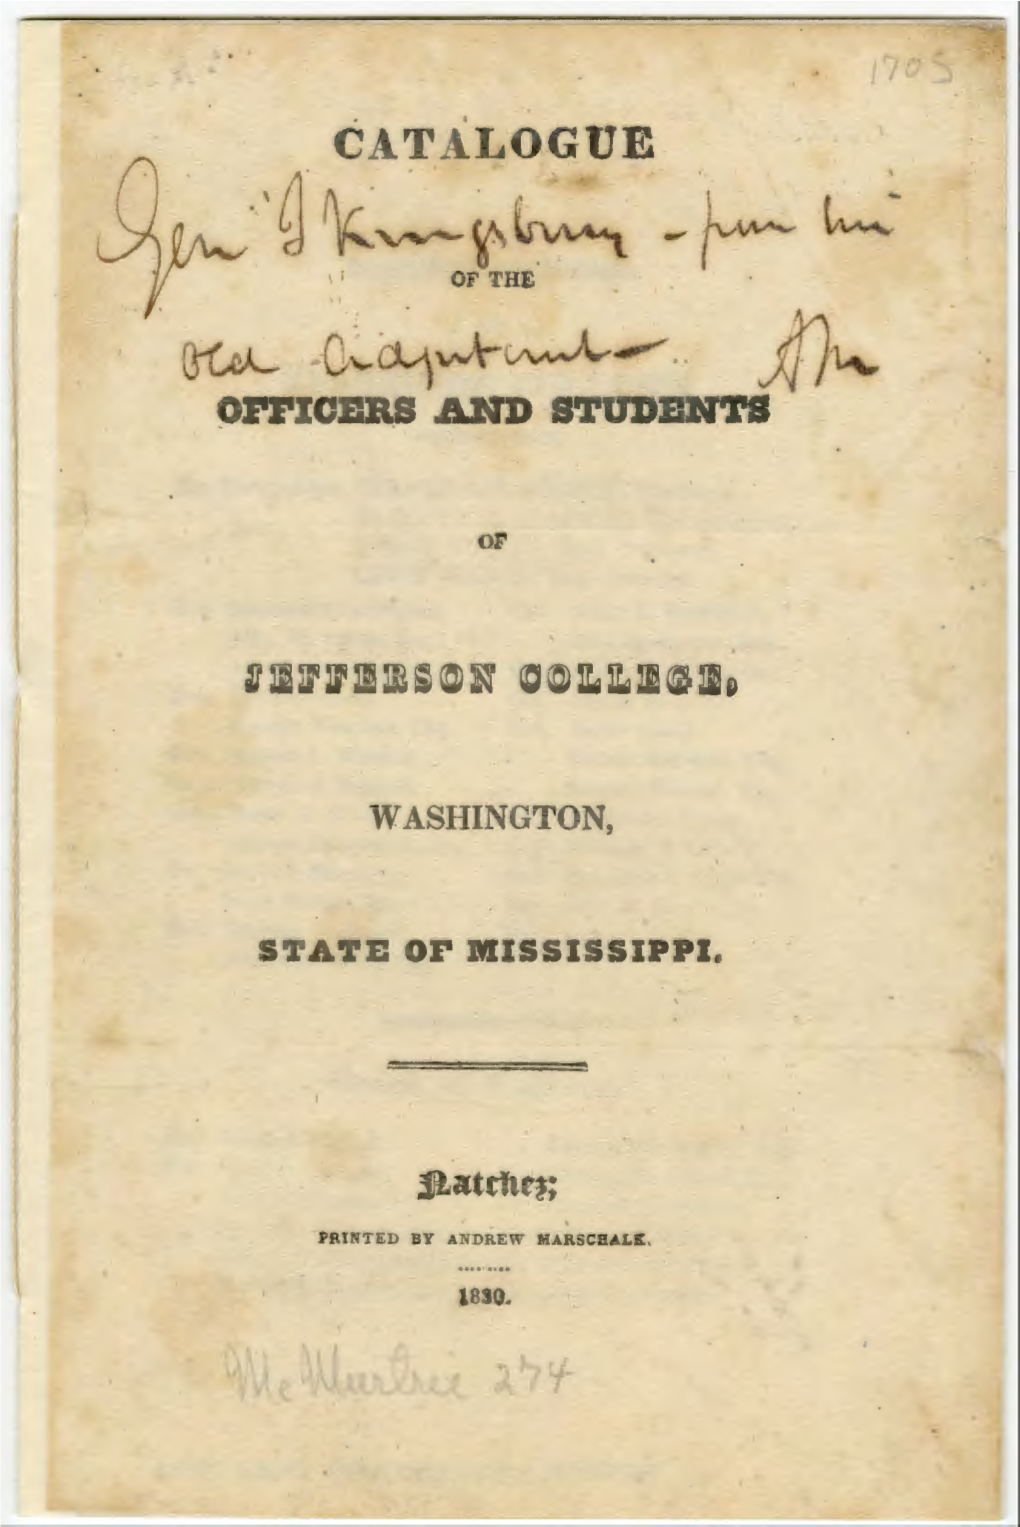 Catalogue of the Officers and Students of Jefferson College, Washington